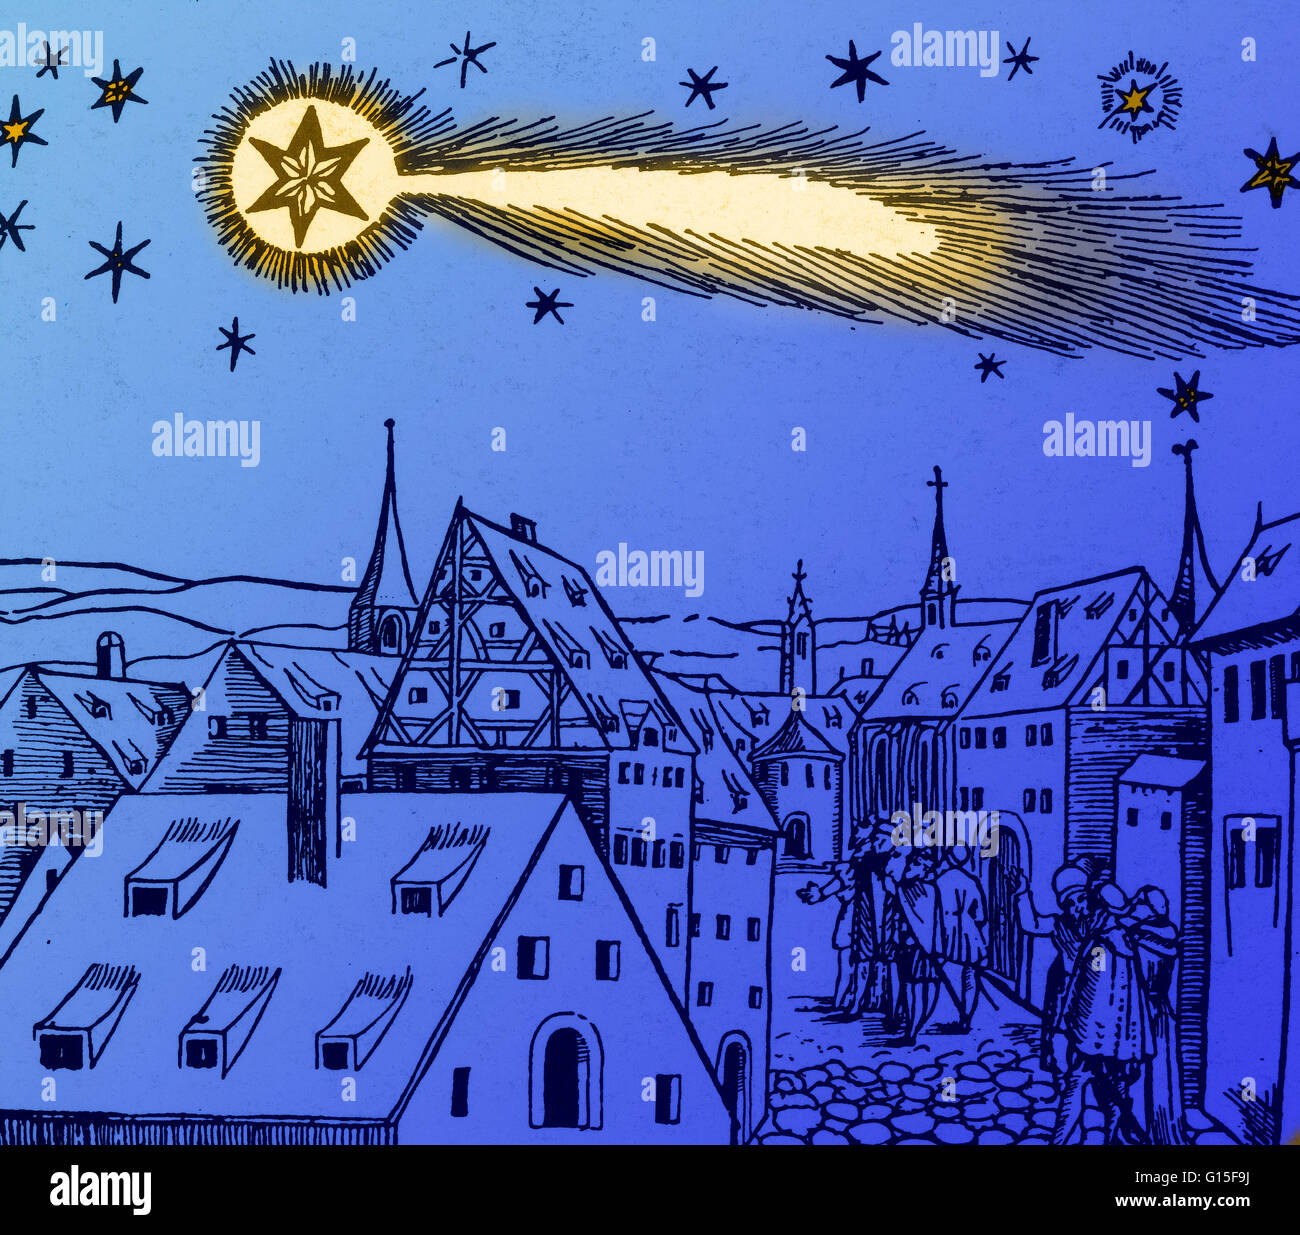 Comets universally foretold disasters and misfortune until the start of the scientific revolution. For example, public fears linked the Great Comet of 1556, shown in a woodcut from a German pamphlet, with earthquakes in that same year. Another century and Stock Photo